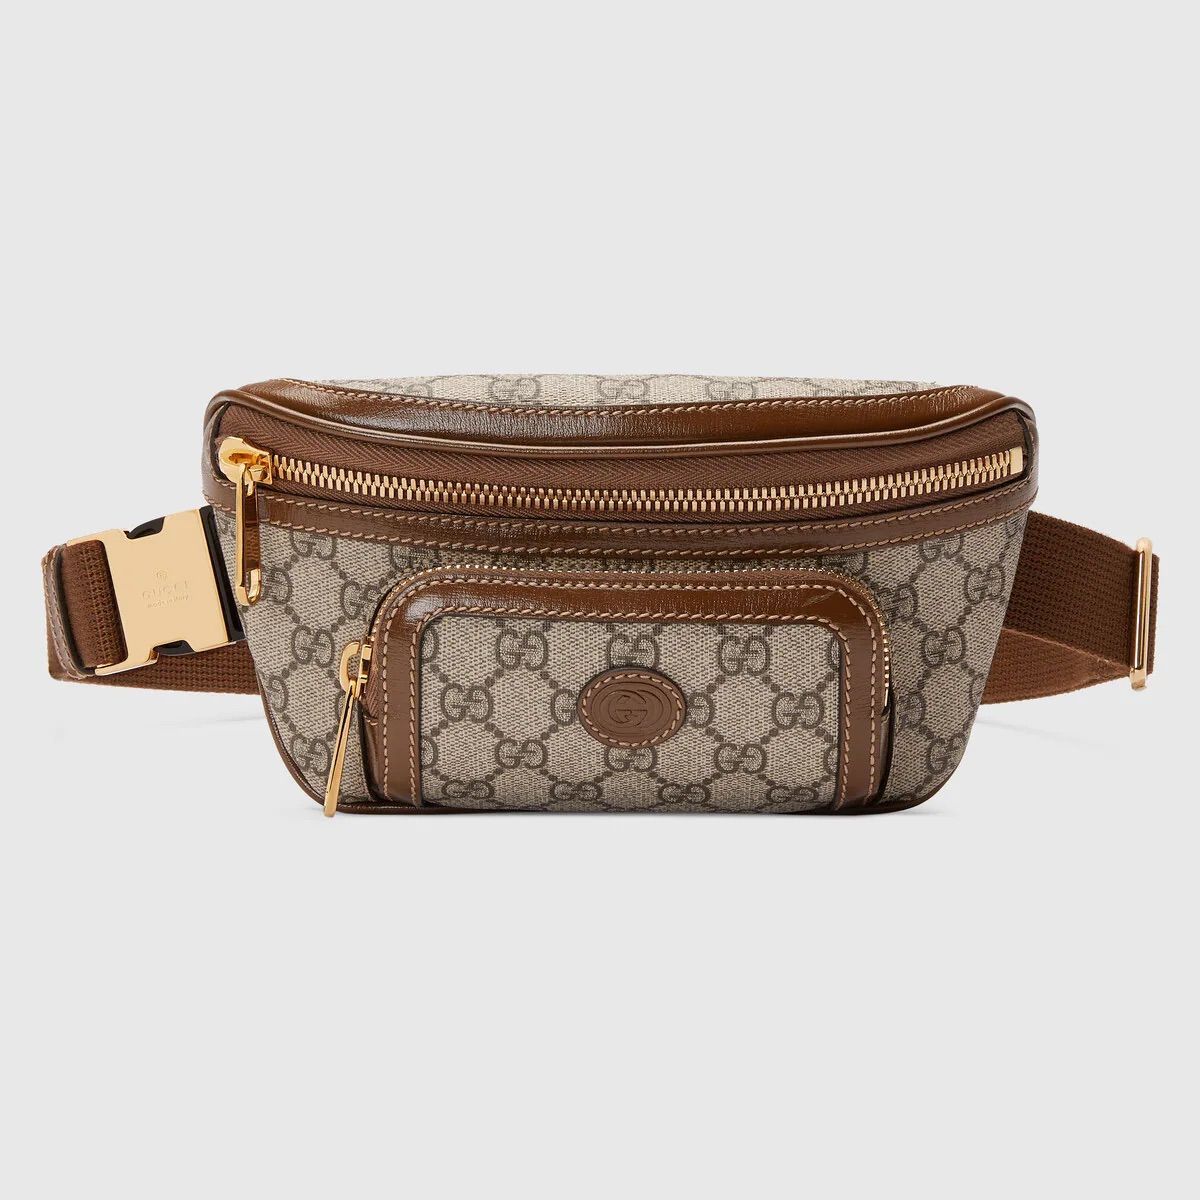 <p><strong>$1190.00</strong></p><p>Quintessential fanny pack designs include sizable compartments and adjustable waist belts that allow the retro accessory to sit comfortably above your hips. Gucci's bag is the epitome of a tried-and-true classic design. Instantly recognizable by the double-<em>G</em> print and heritage details, its buckle belt can be worn at the hip or across the chest. When it comes to styling, keep the rest to a minimum and let the splashy style speak for itself.</p><p><strong>Size:</strong> 9 "W x 4.7 "H x 1 "D</p><p><strong>Material: </strong>Canvas, Leather </p><p><strong>Colors:</strong> Beige/Ebony GG Supreme Canvas, Black GG Supreme Canvas, Beige/White GG Supreme Canvas</p>